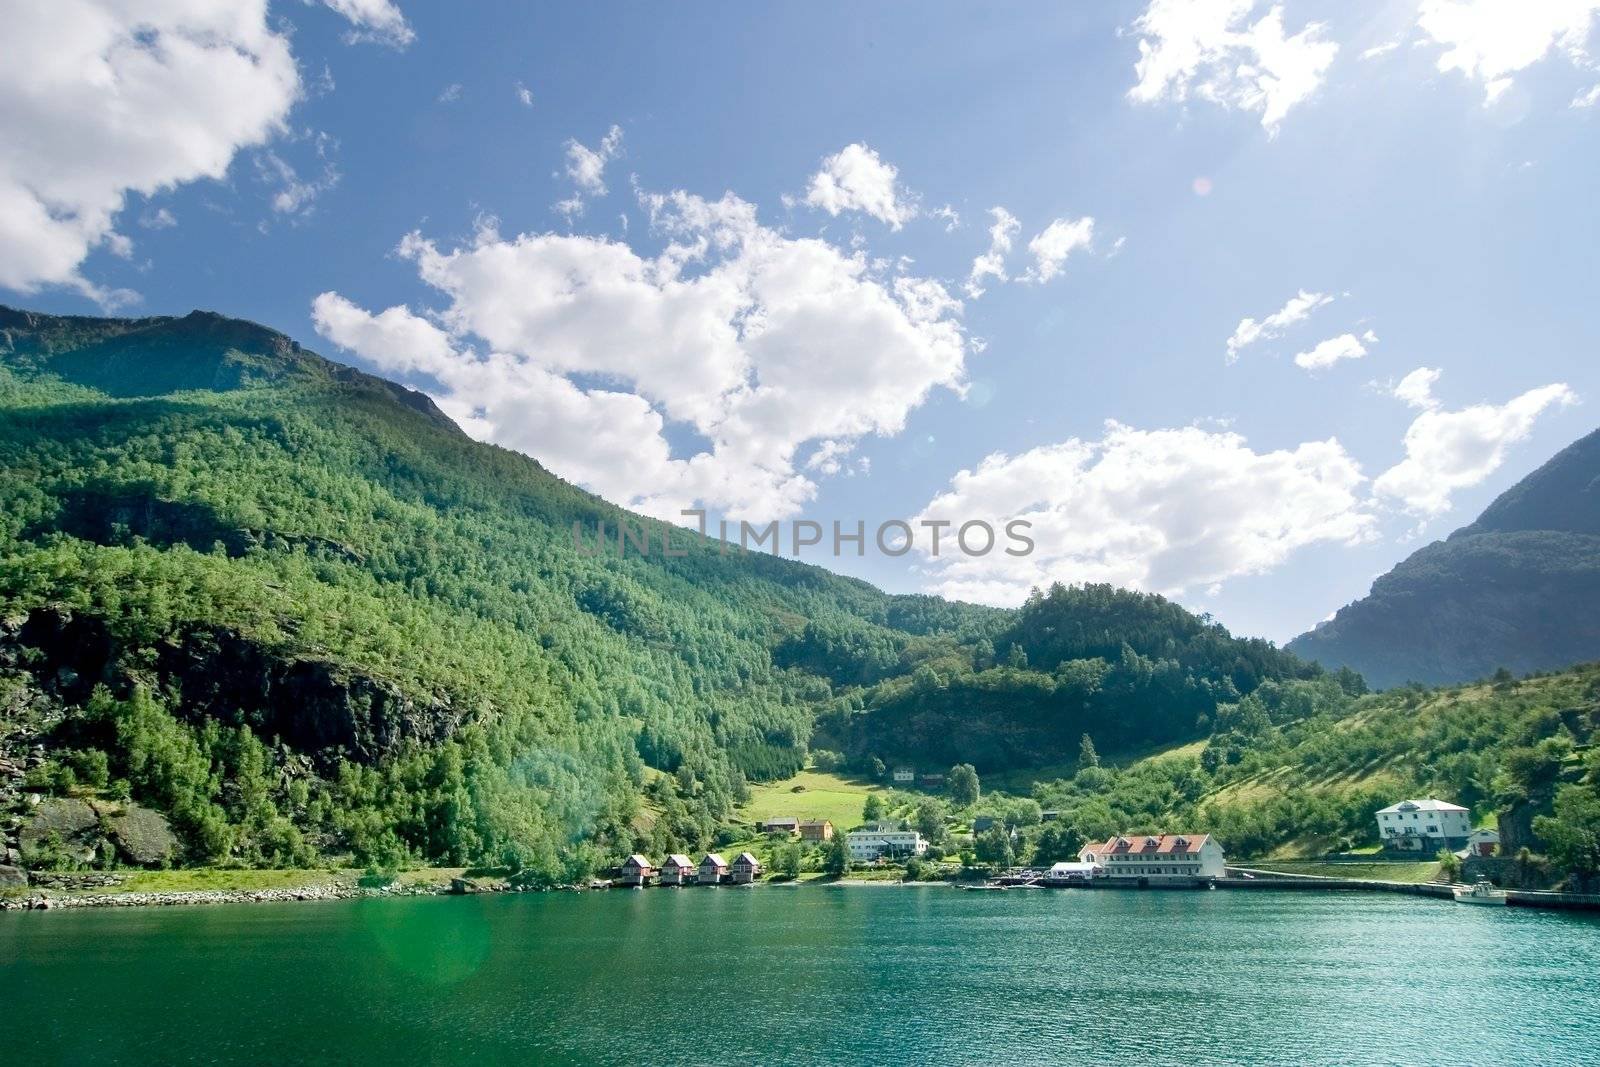 Fjord landscape in the western area of Norway, Aurlandsfjord in Sognefjord.